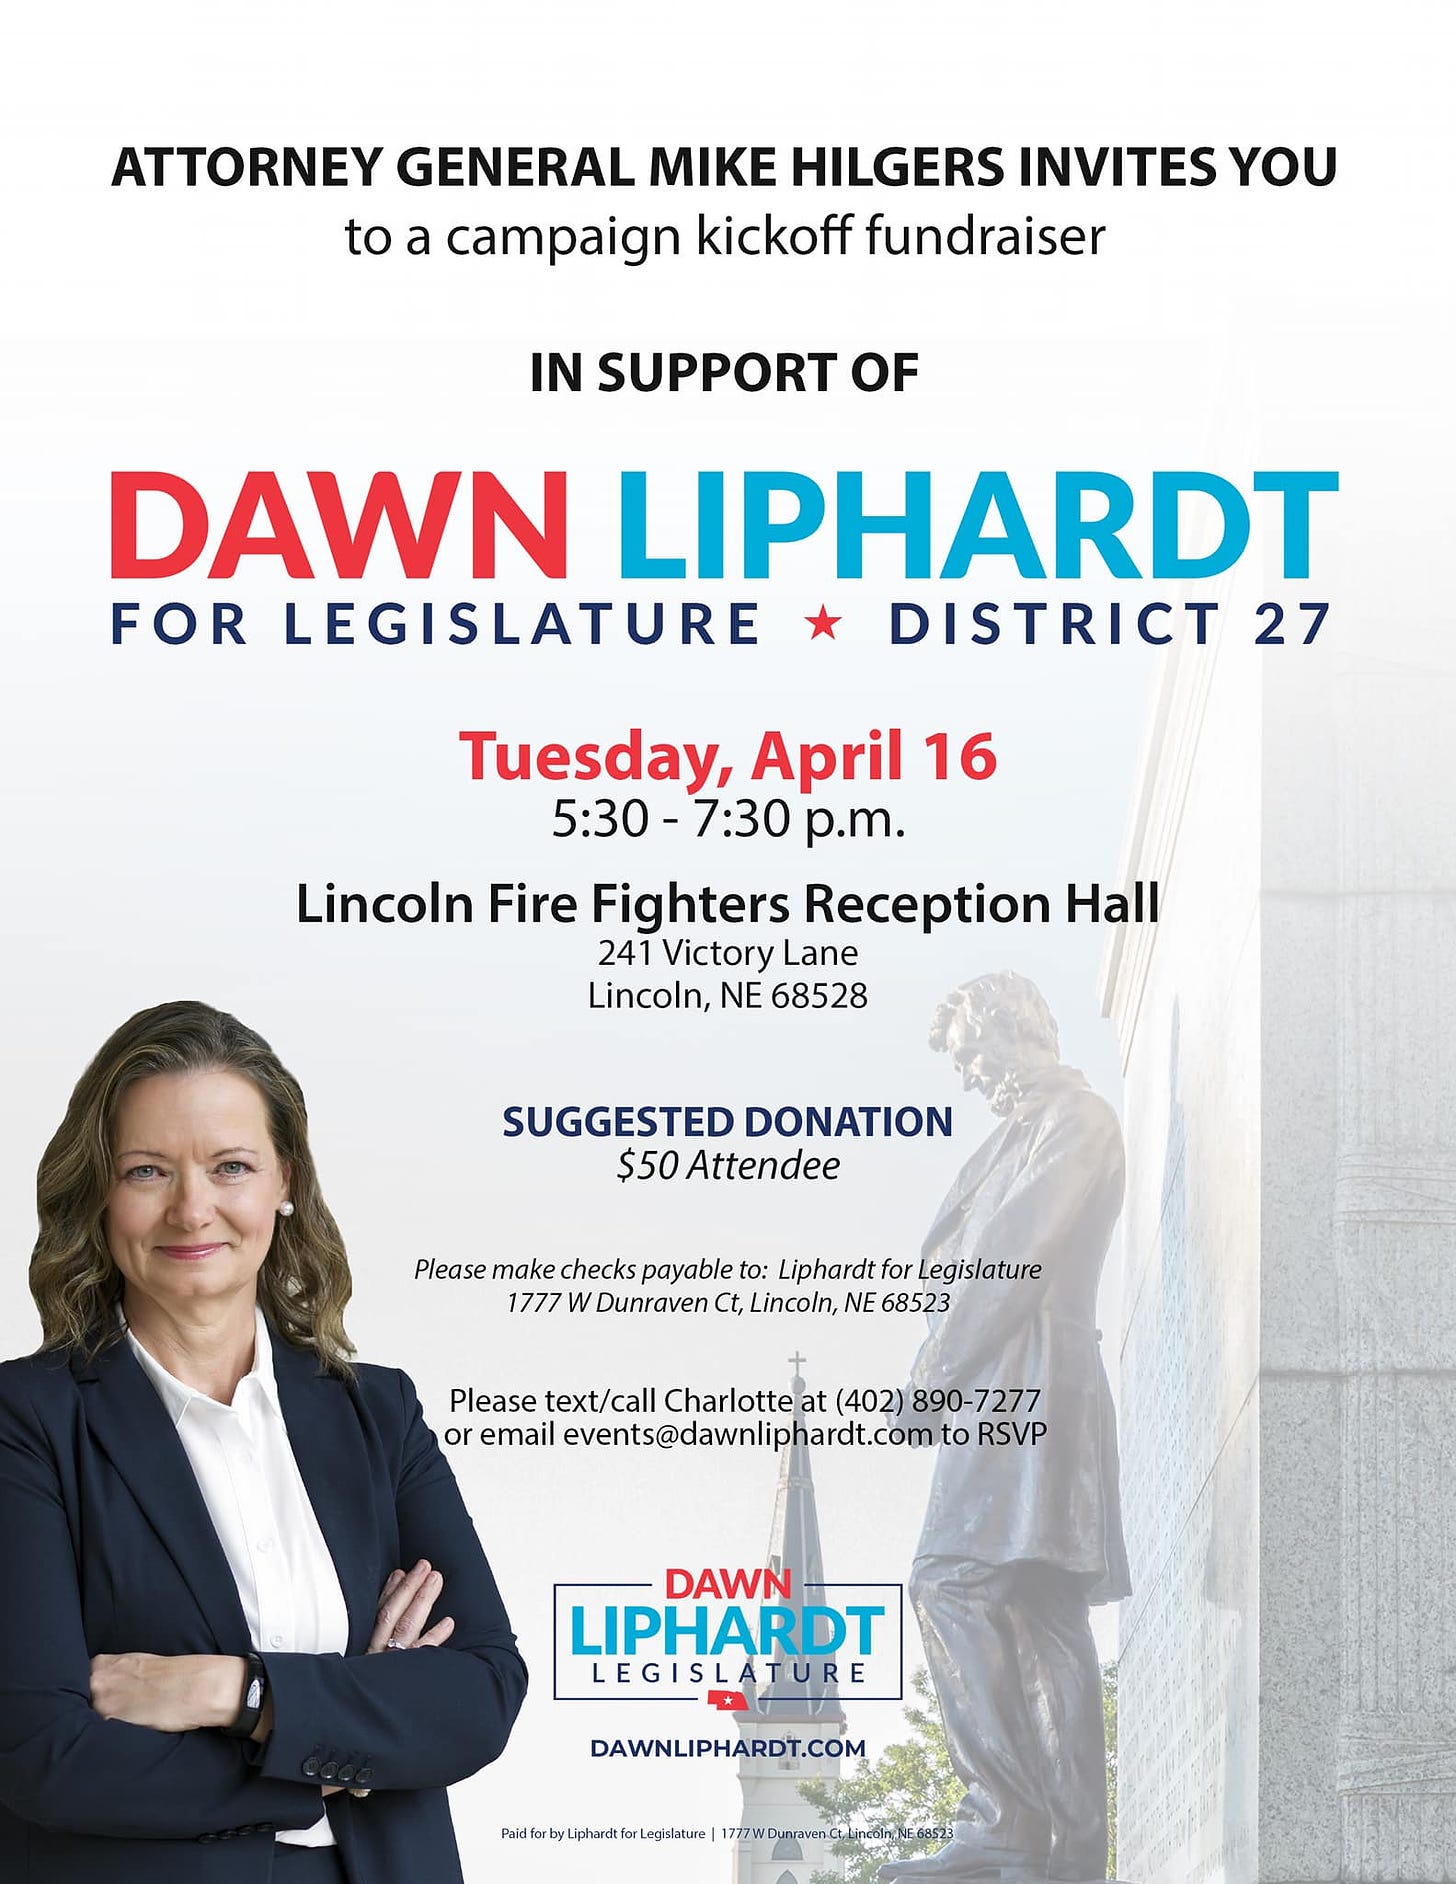 May be an image of 2 people and text that says 'ATTORNEY GENERAL MIKE HILGERS INVITES YOU to a campaign kickoff fundraiser IN SUPPORT OF DAWN LIPHARDT FOR LEGISLATURE DISTRICT 27 Tuesday, April 16 5:30-7:30 p.m. Lincoln Fire Fighters Reception Hall 241 Victory Lane Lincoln, NE 68528 SUGGESTED DONATION $50 Attendee Please make checks payable to: Liphardtfor Legislature 1777 Dunraven Ct,Lincoln, NE 68523 Please text/call Charltte (402) or email events@dawnliphardt.comto RSVP DAWN LIPHARDT LEGISLATURE LEGIS DAWNLIPHARDT.COM P PaidforbyLiphardt.forLegislature'